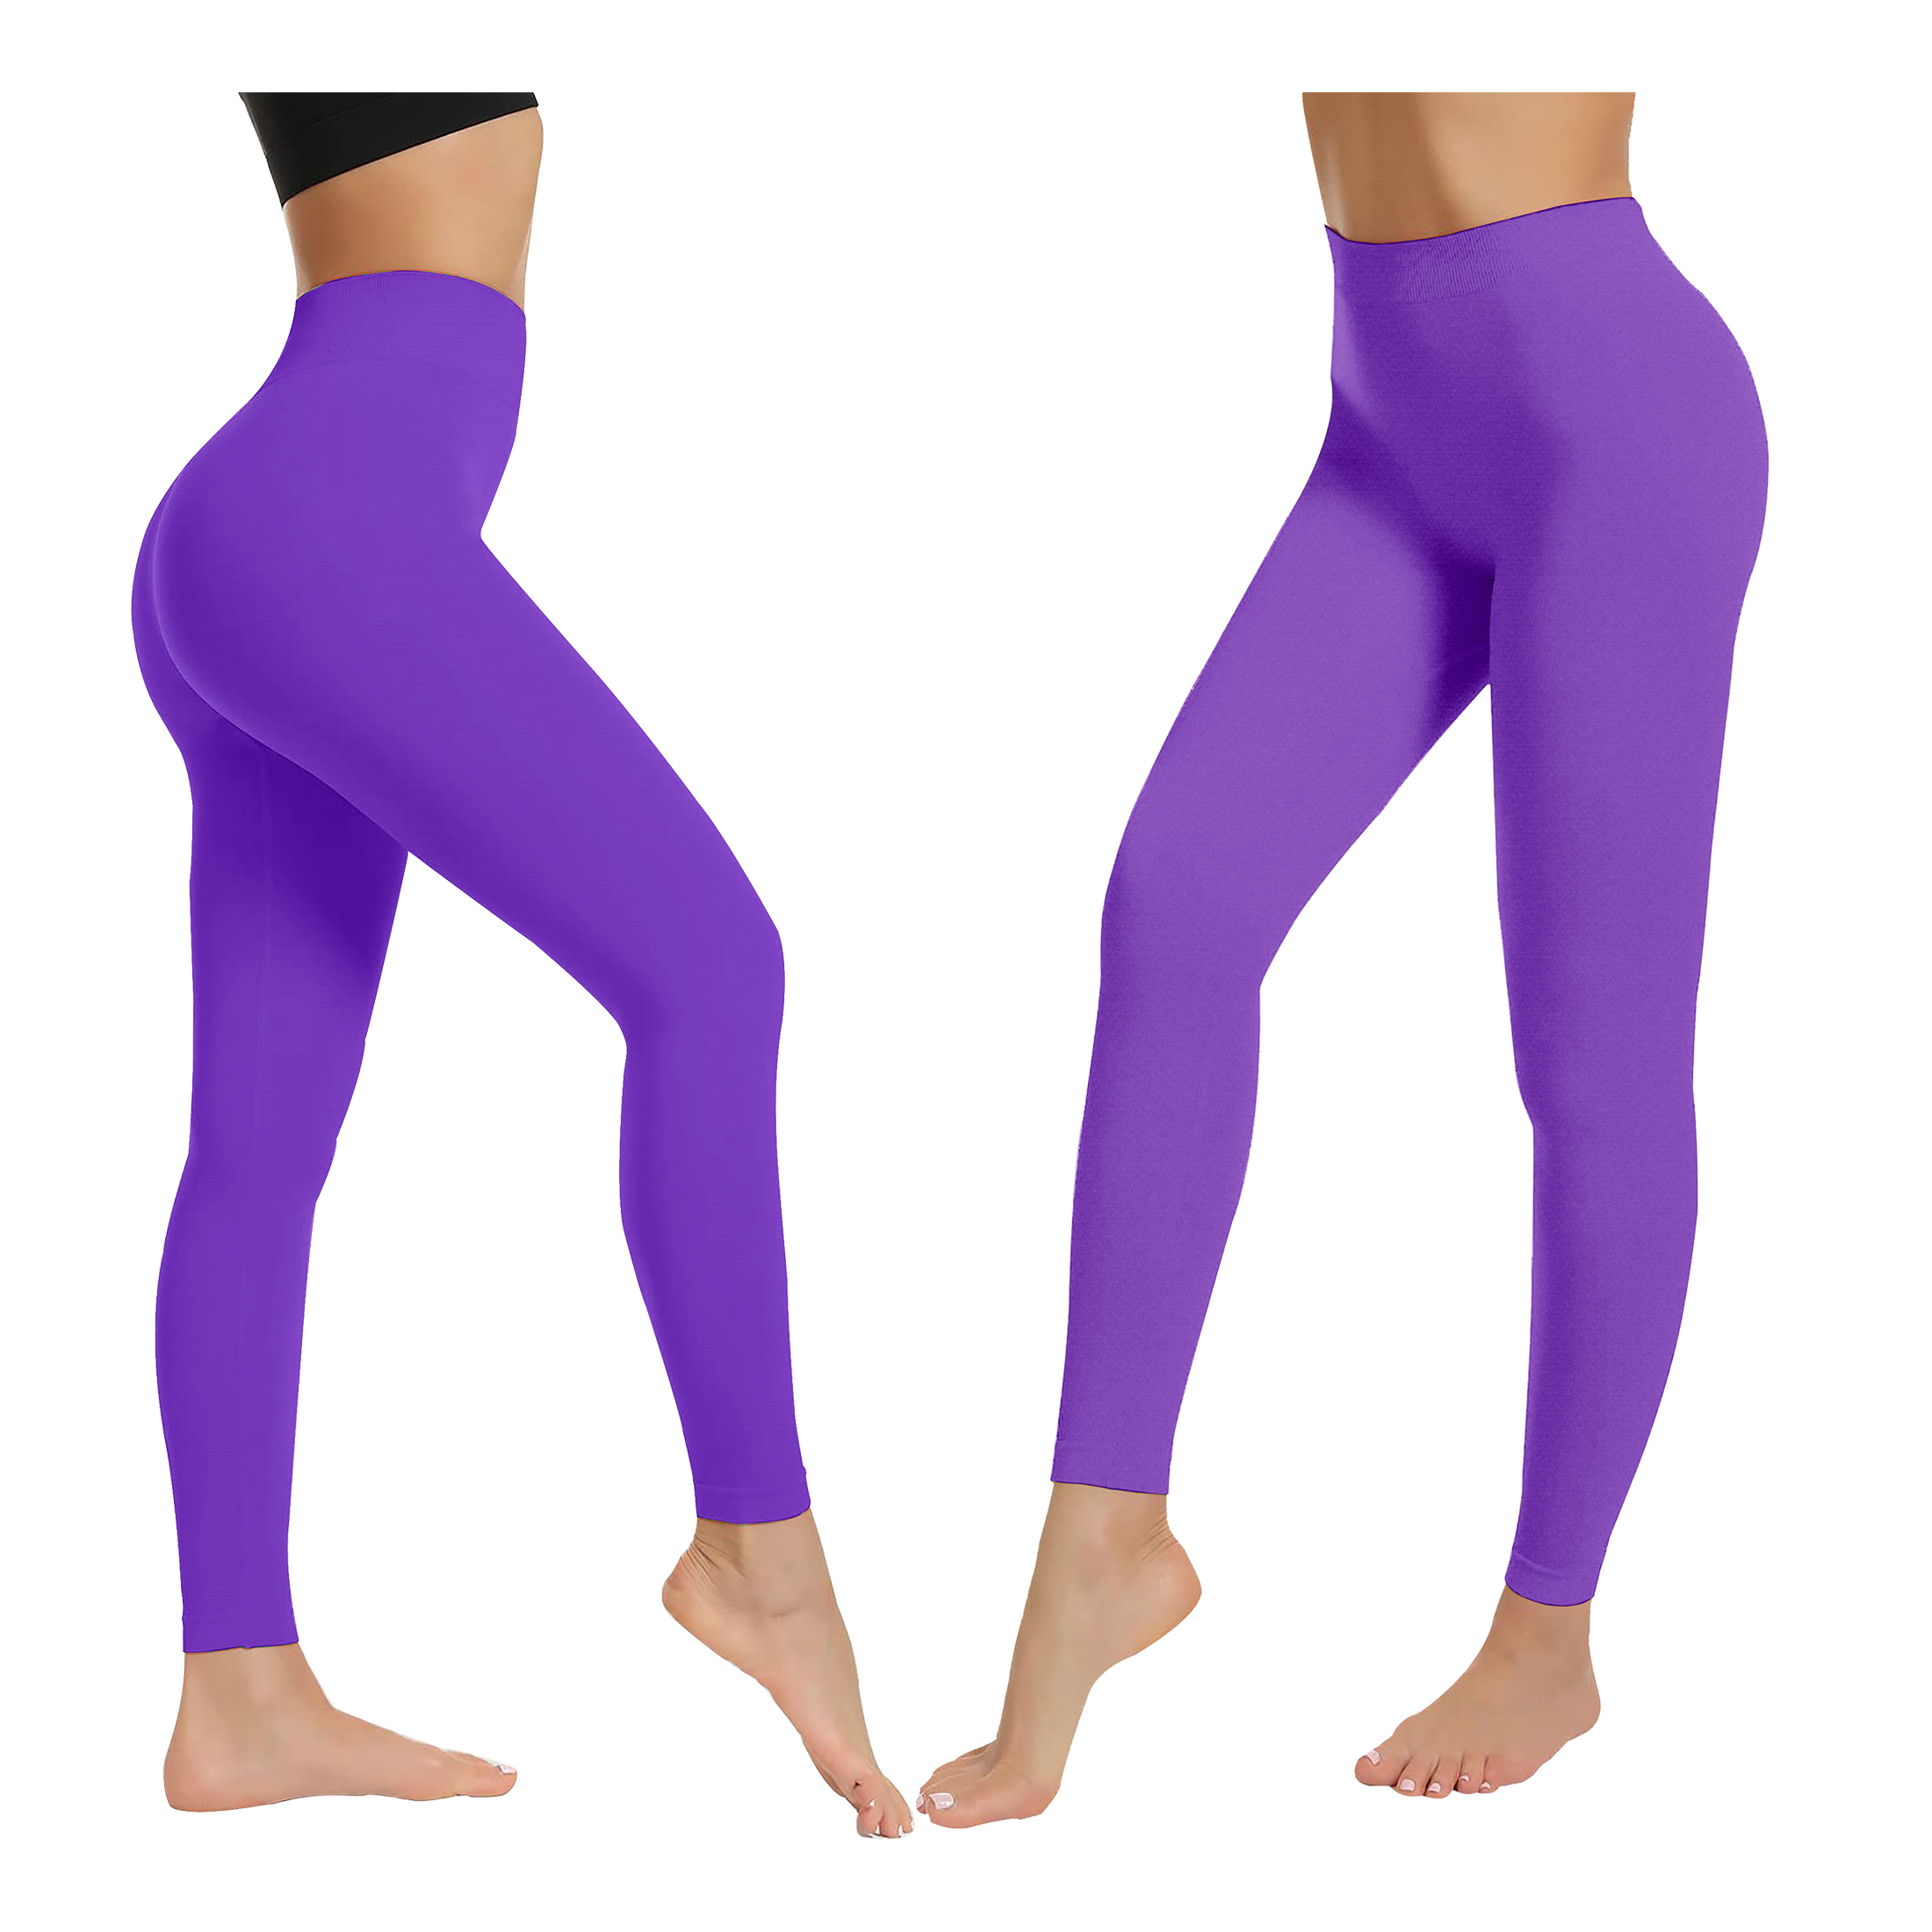 3-Pack: Women's High-Waist Ultra-Soft Solid Fitness Stretchy Yoga Leggings Pants - M